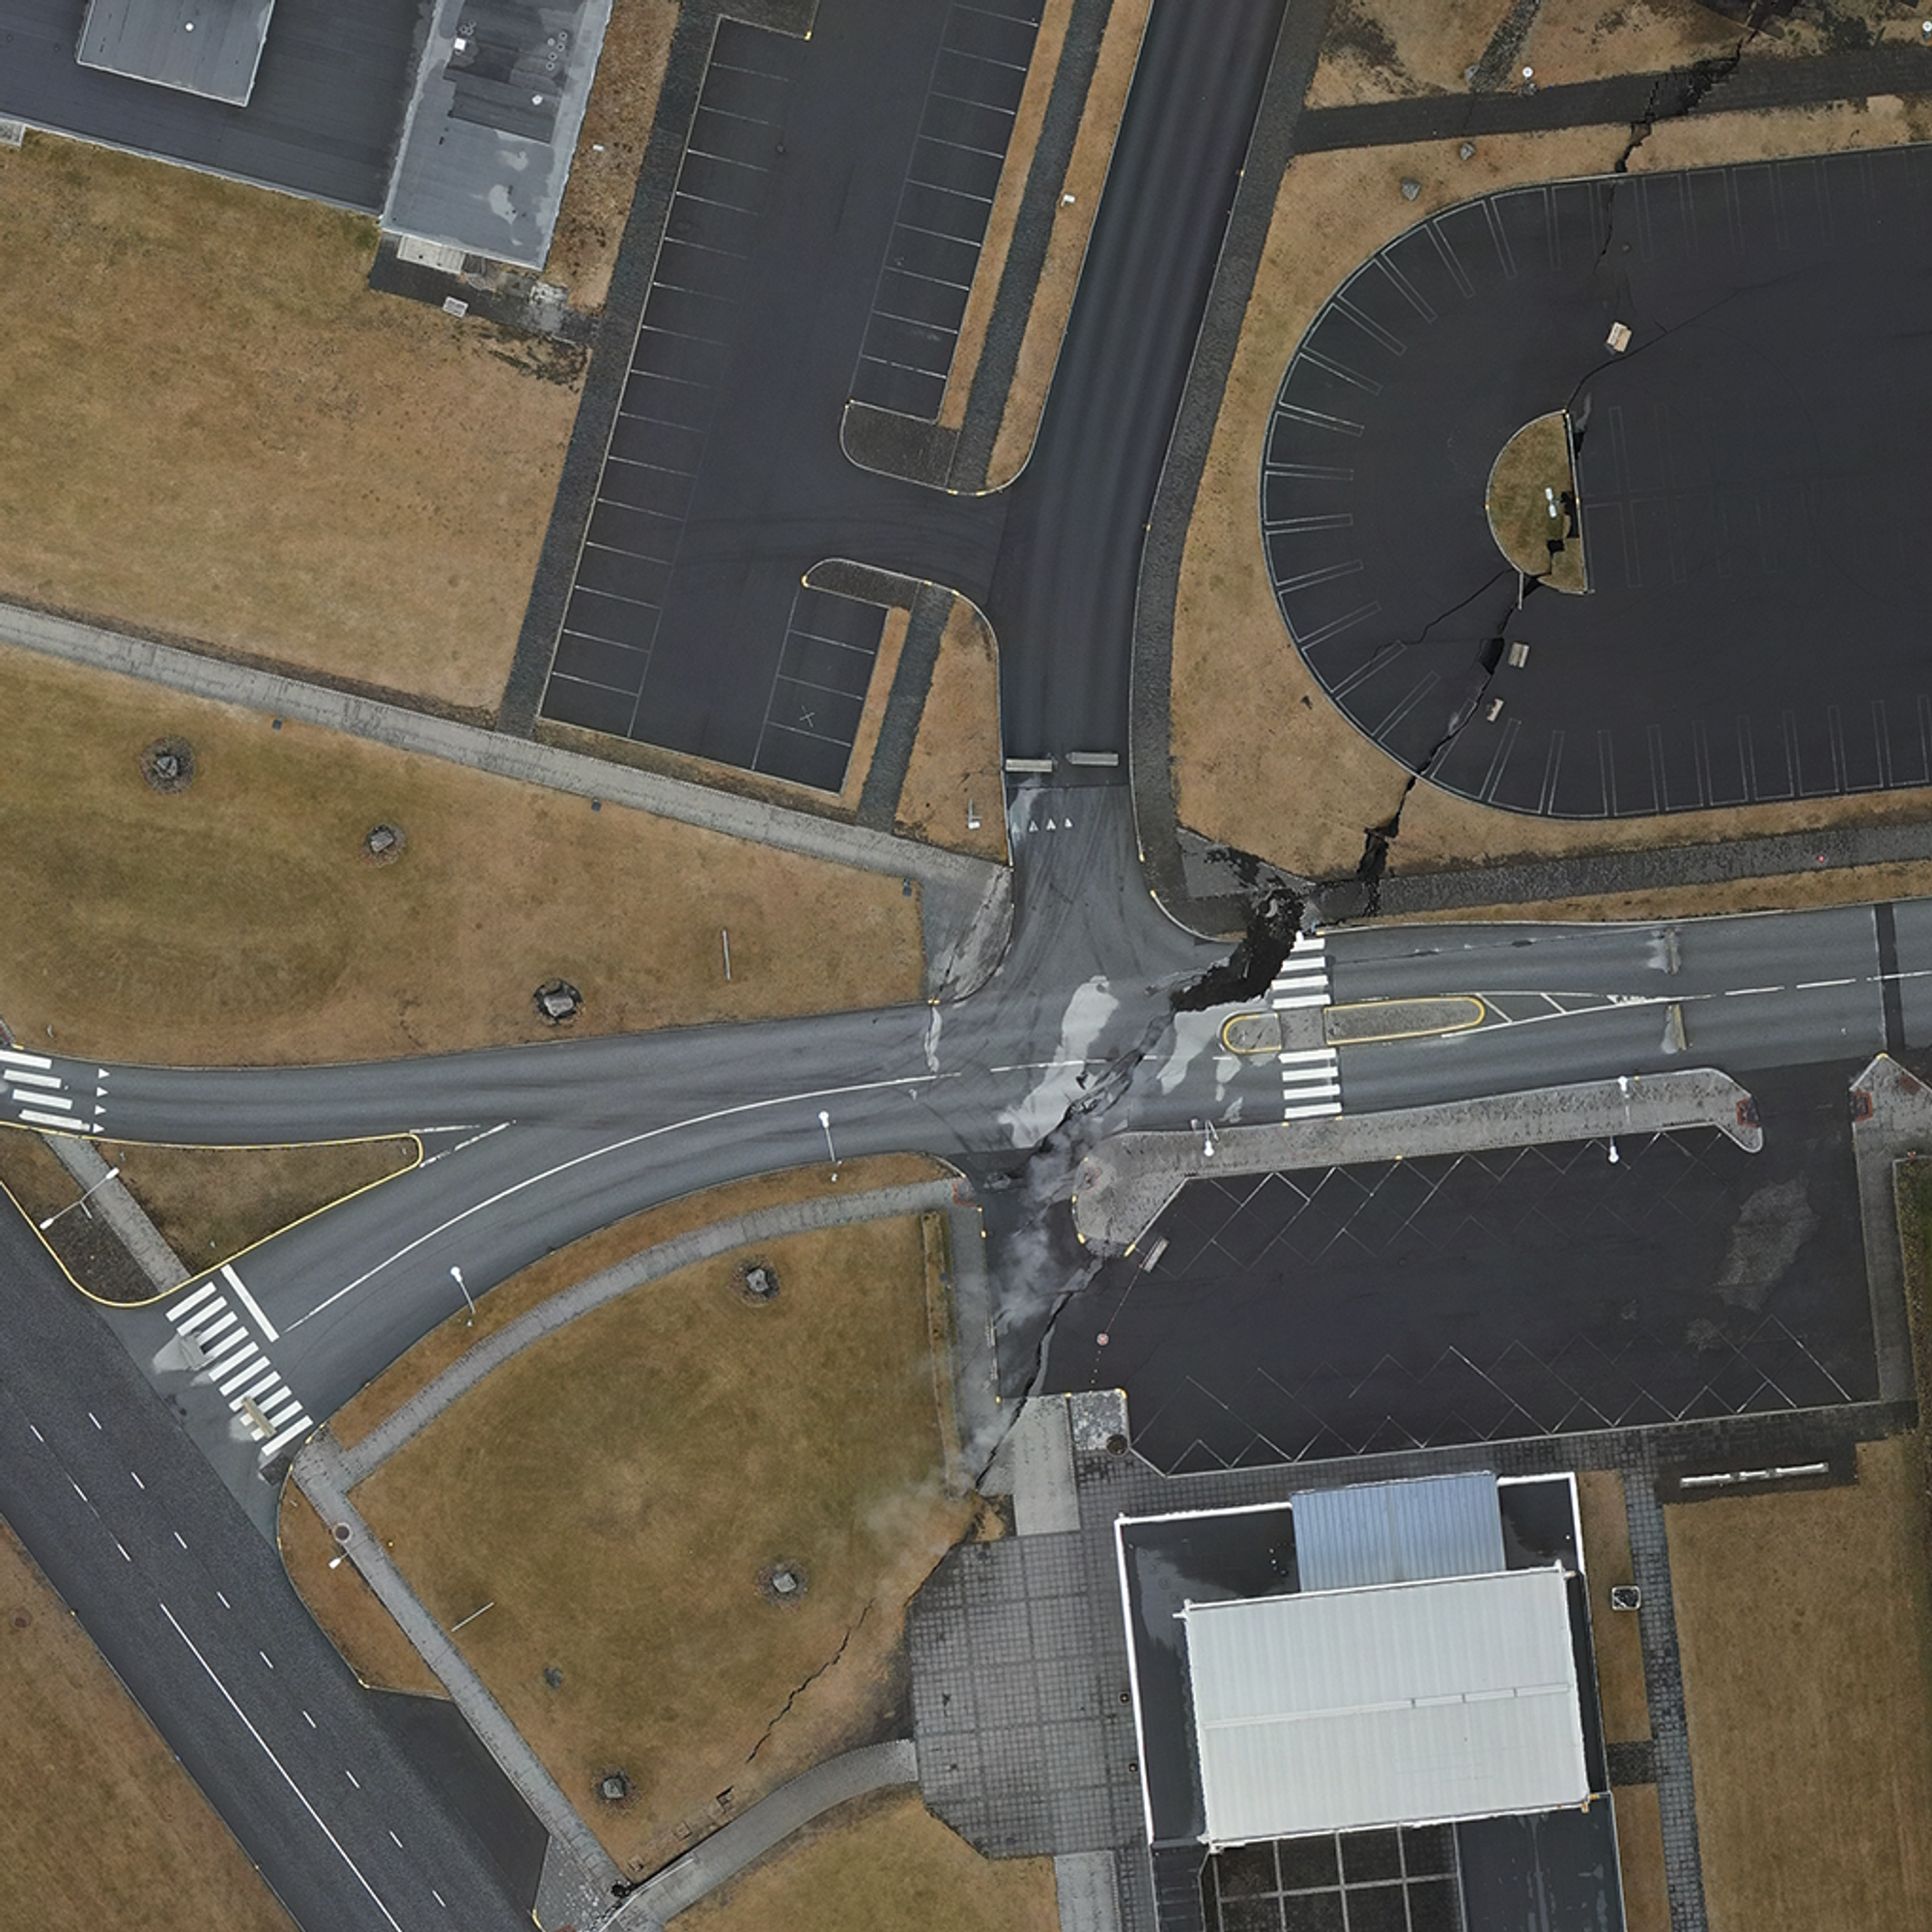 An aerial view of a roadway system